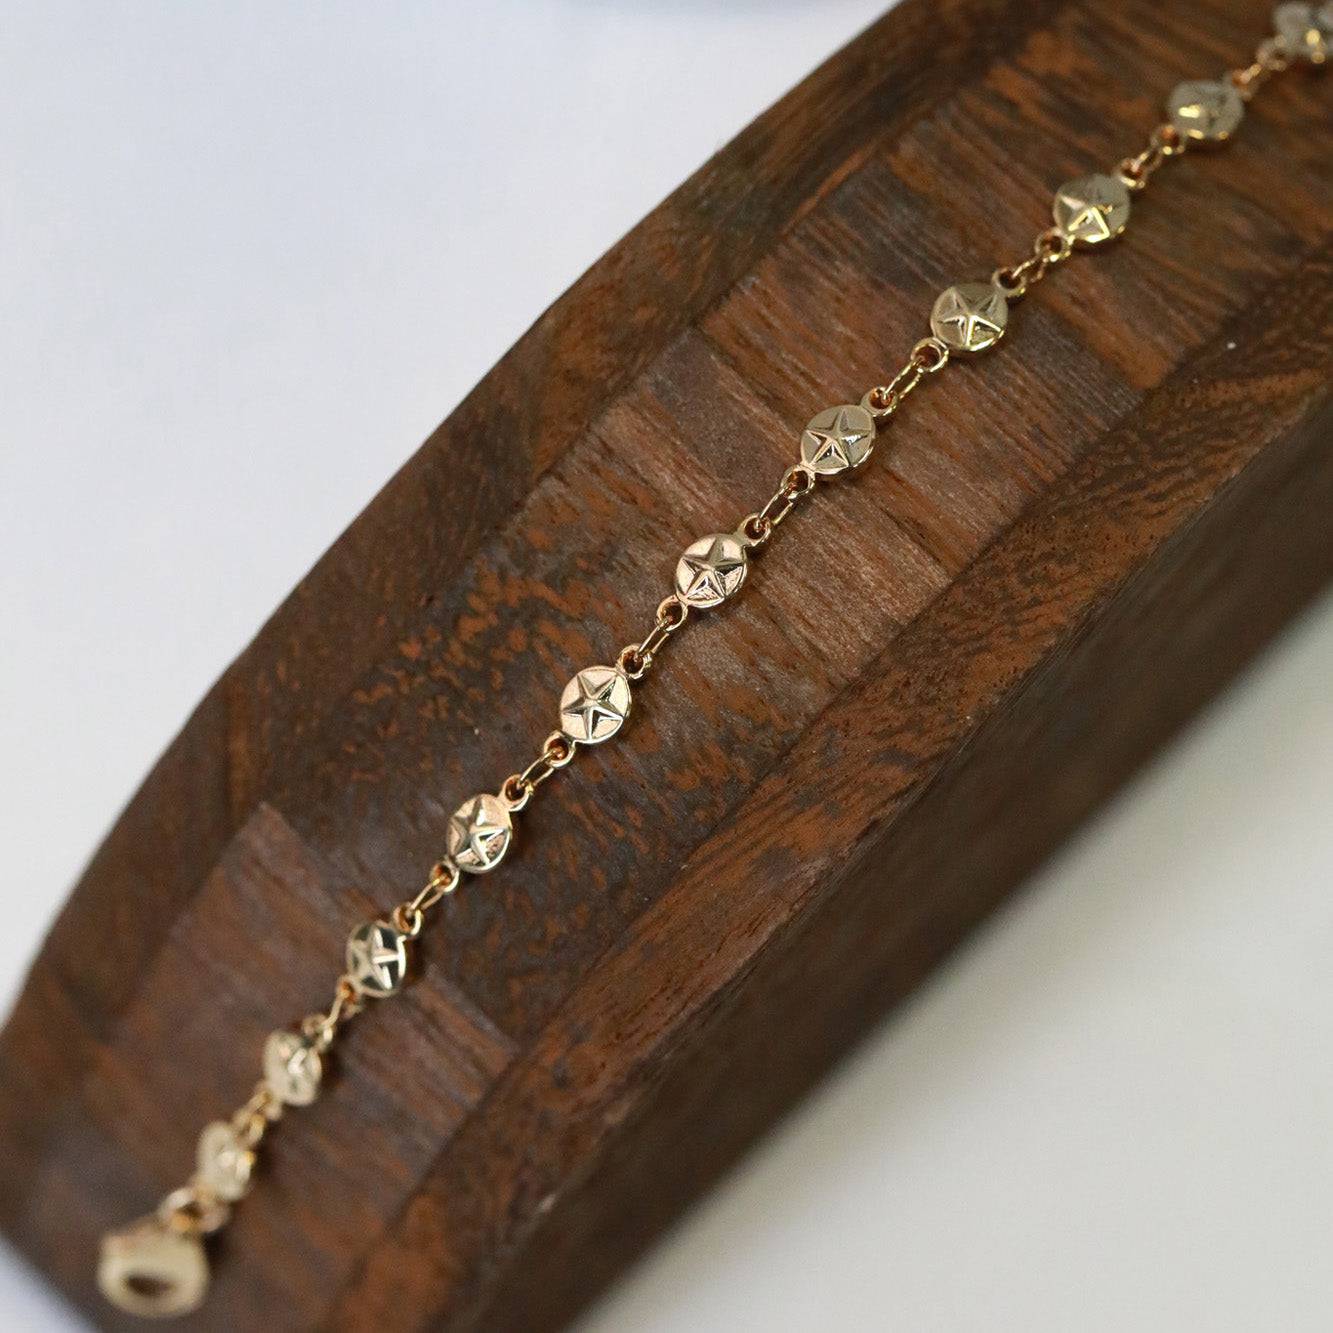 Charmed Bracelet - The Gilded Witch